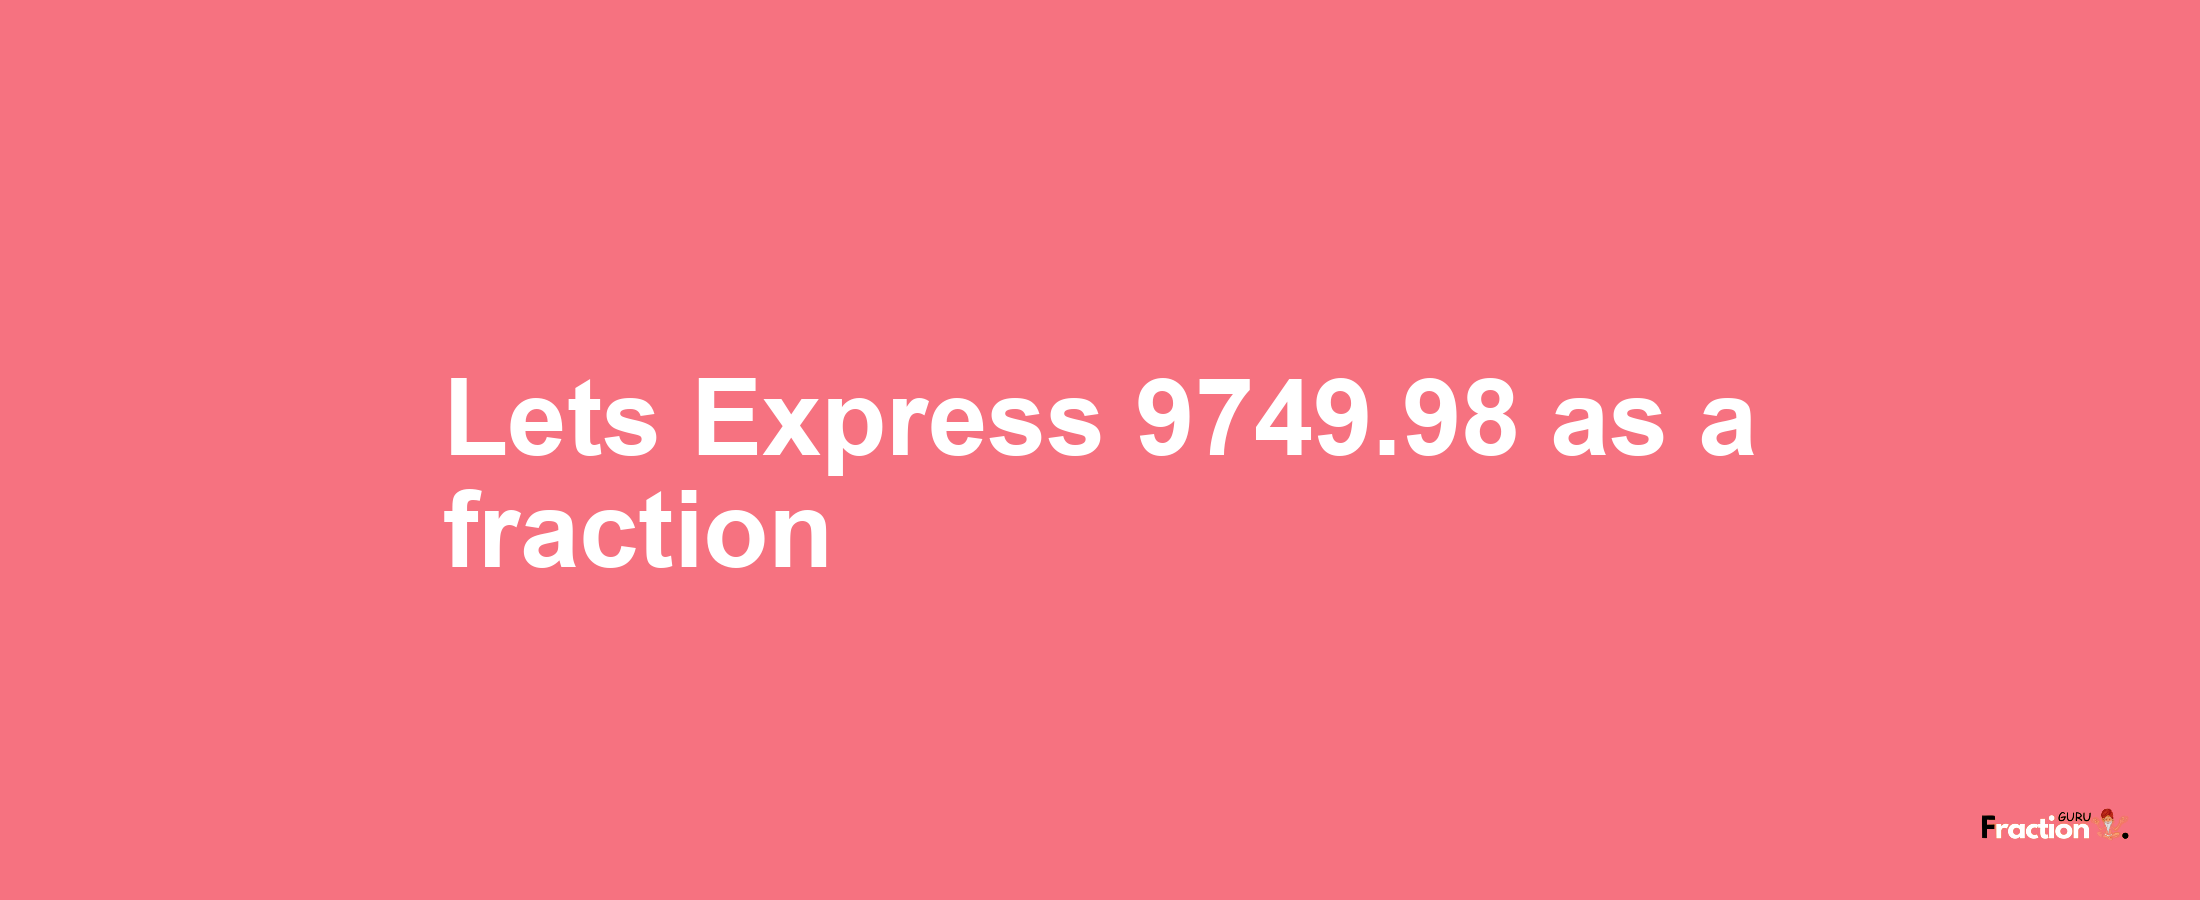 Lets Express 9749.98 as afraction